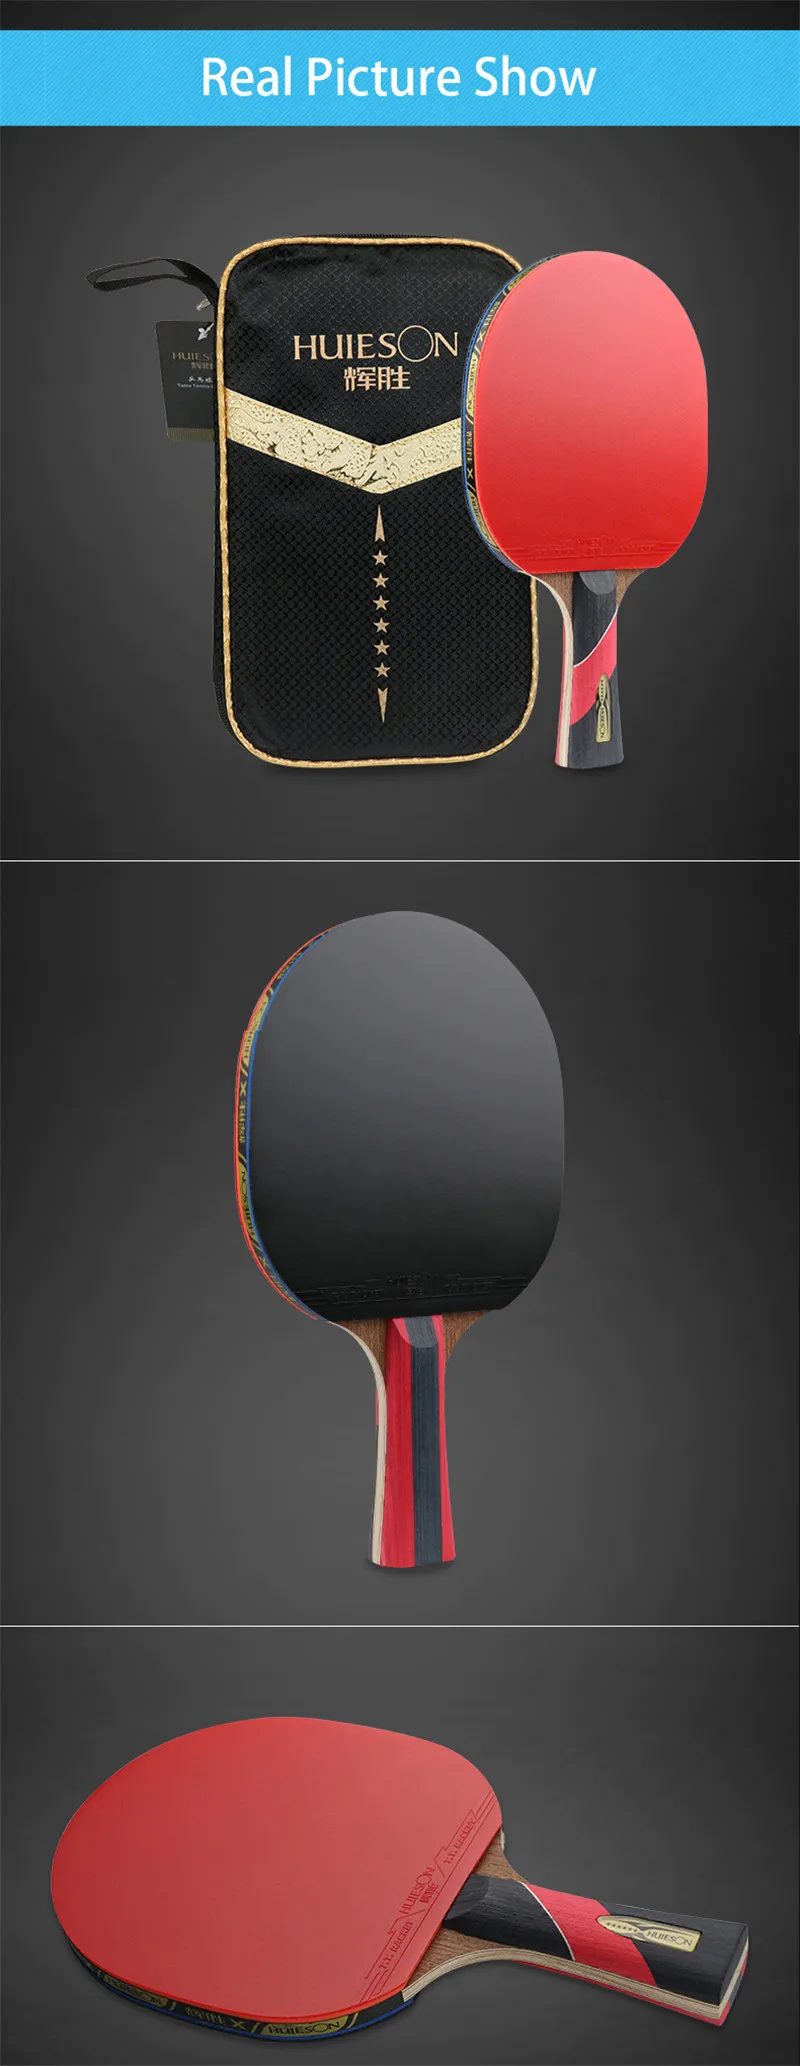 Huieson Wenge Wood & Carbon Fiber Blade 6 Star Table Tennis Racket Sticky Pimples-in Rubber Super Powerful Ping Pong Racket Bat (5)